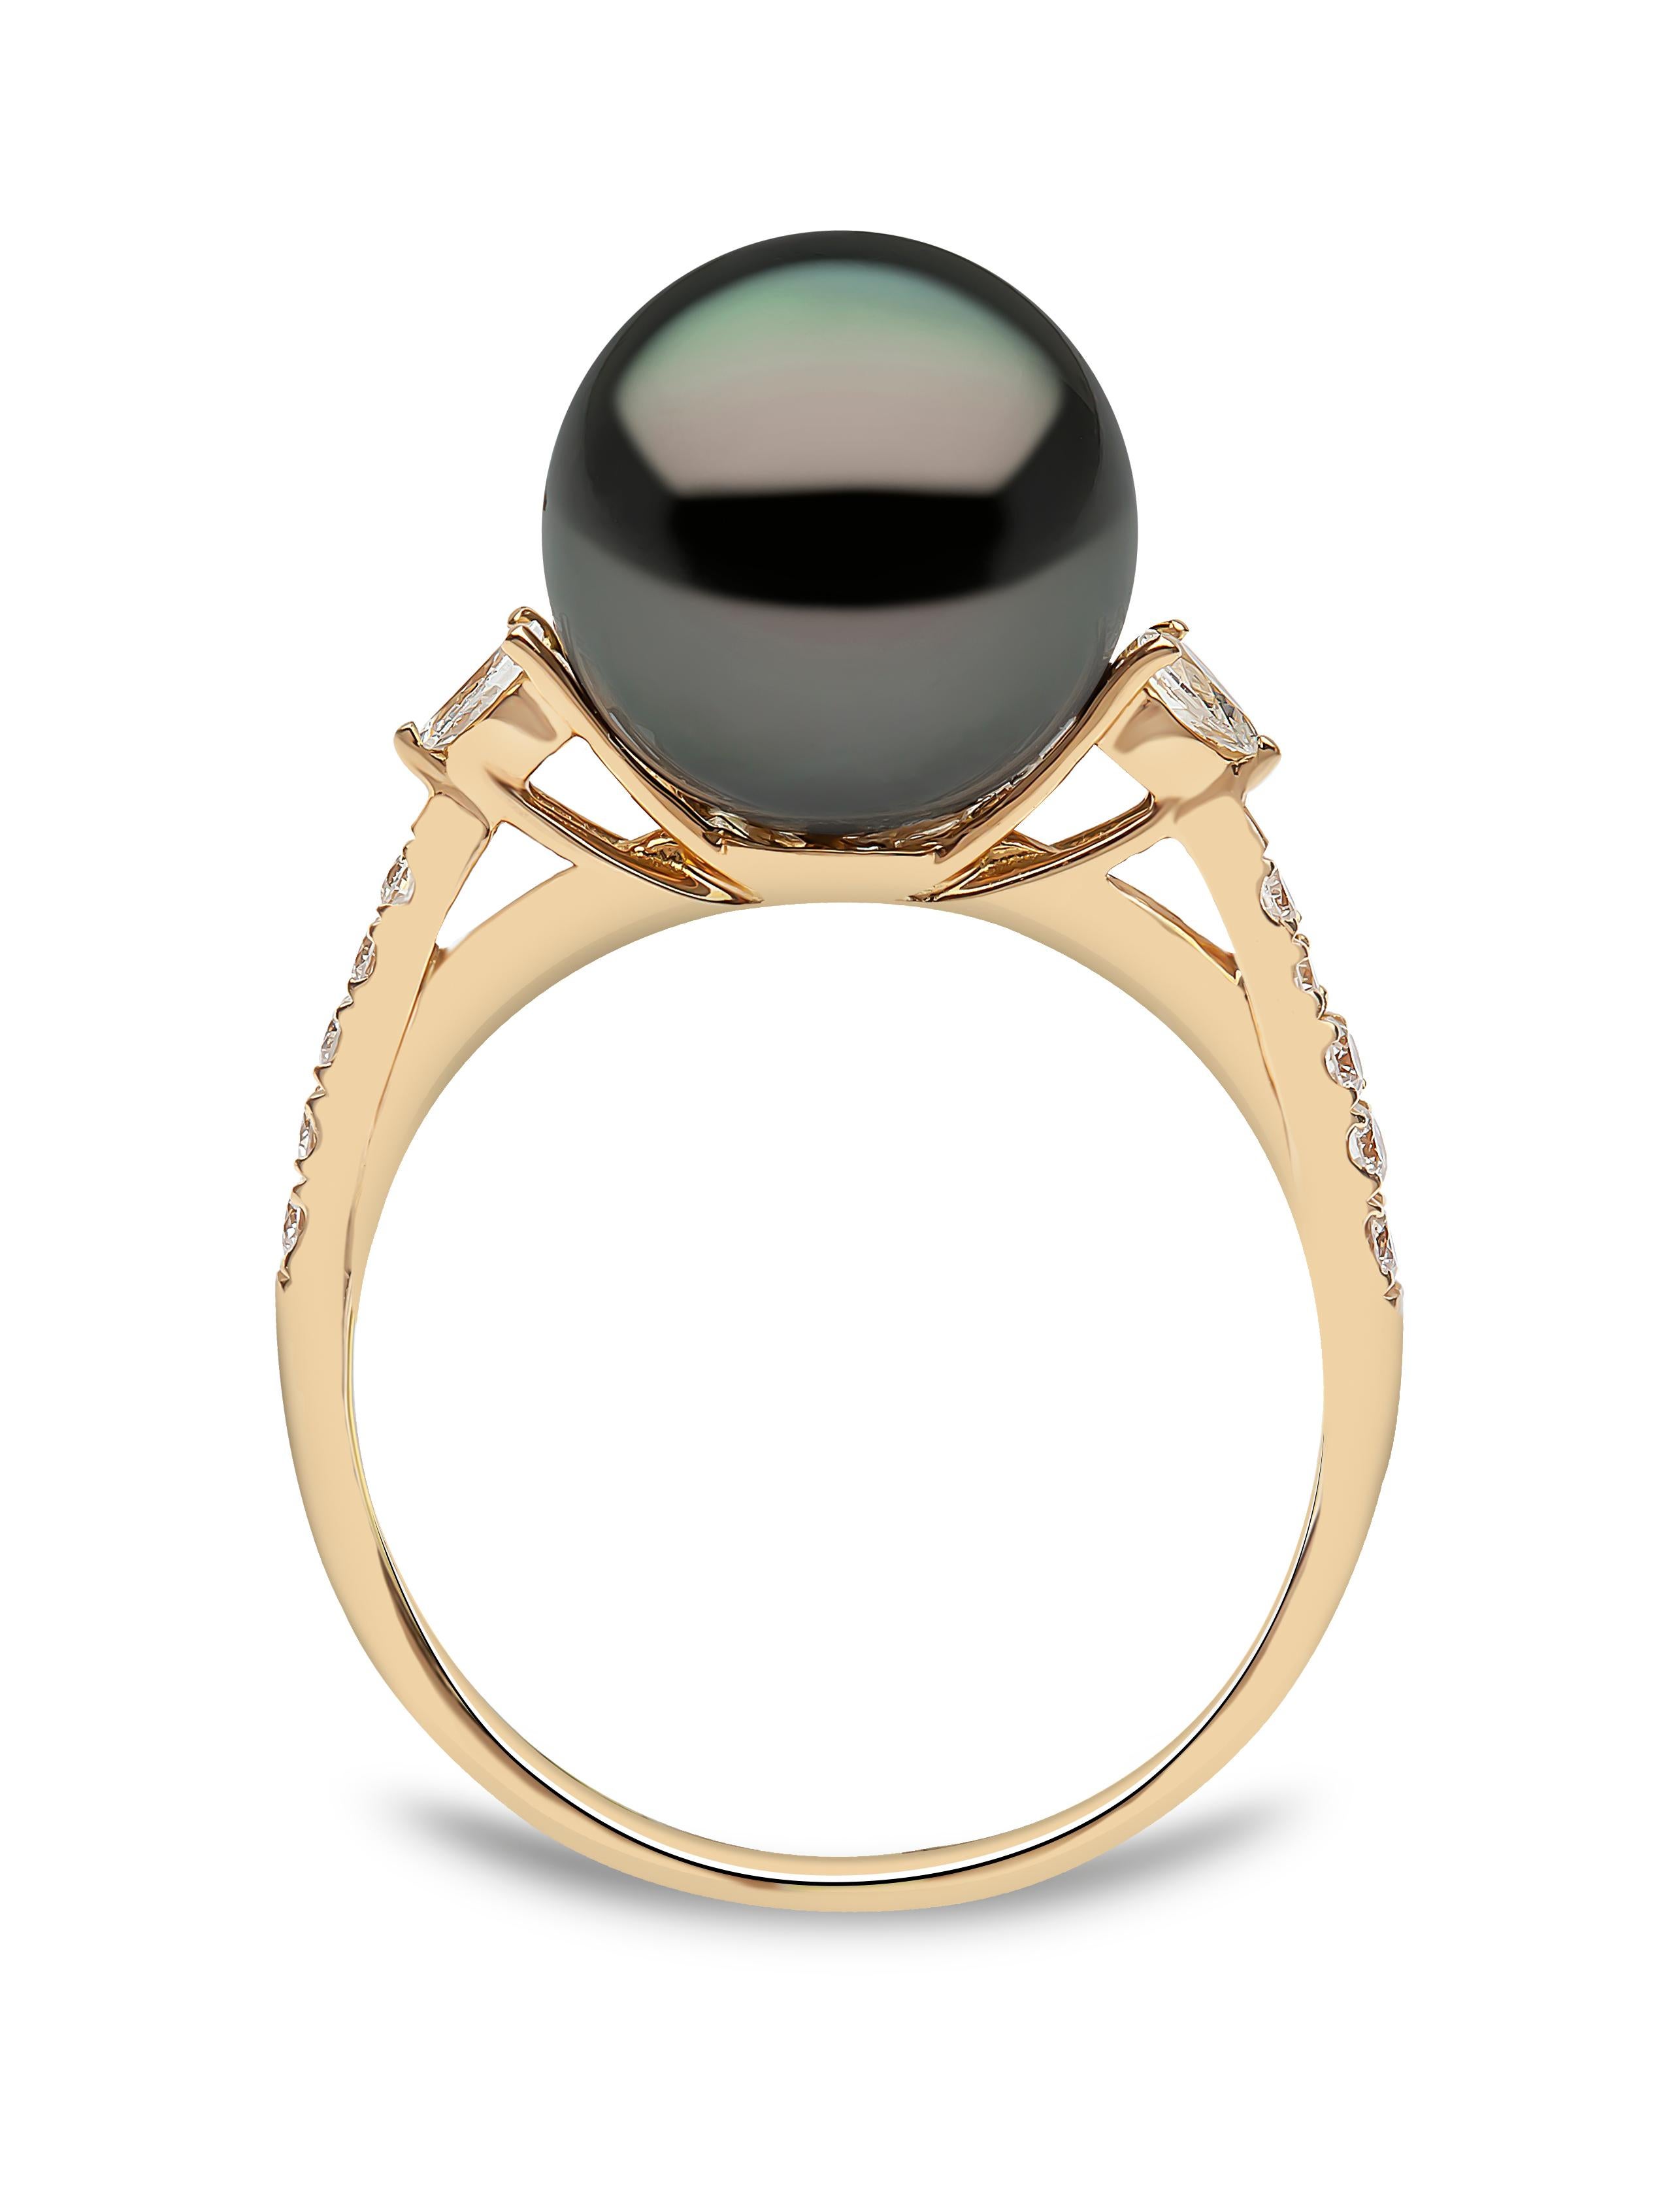 This delicate ring by Yoko London features a lustrous Tahitian pearl at the forefront of its design. The spectacular hues of the pearl are perfectly accentuated by the 18 Karat Yellow Gold setting and elegant diamond shoulders. A versatile piece,